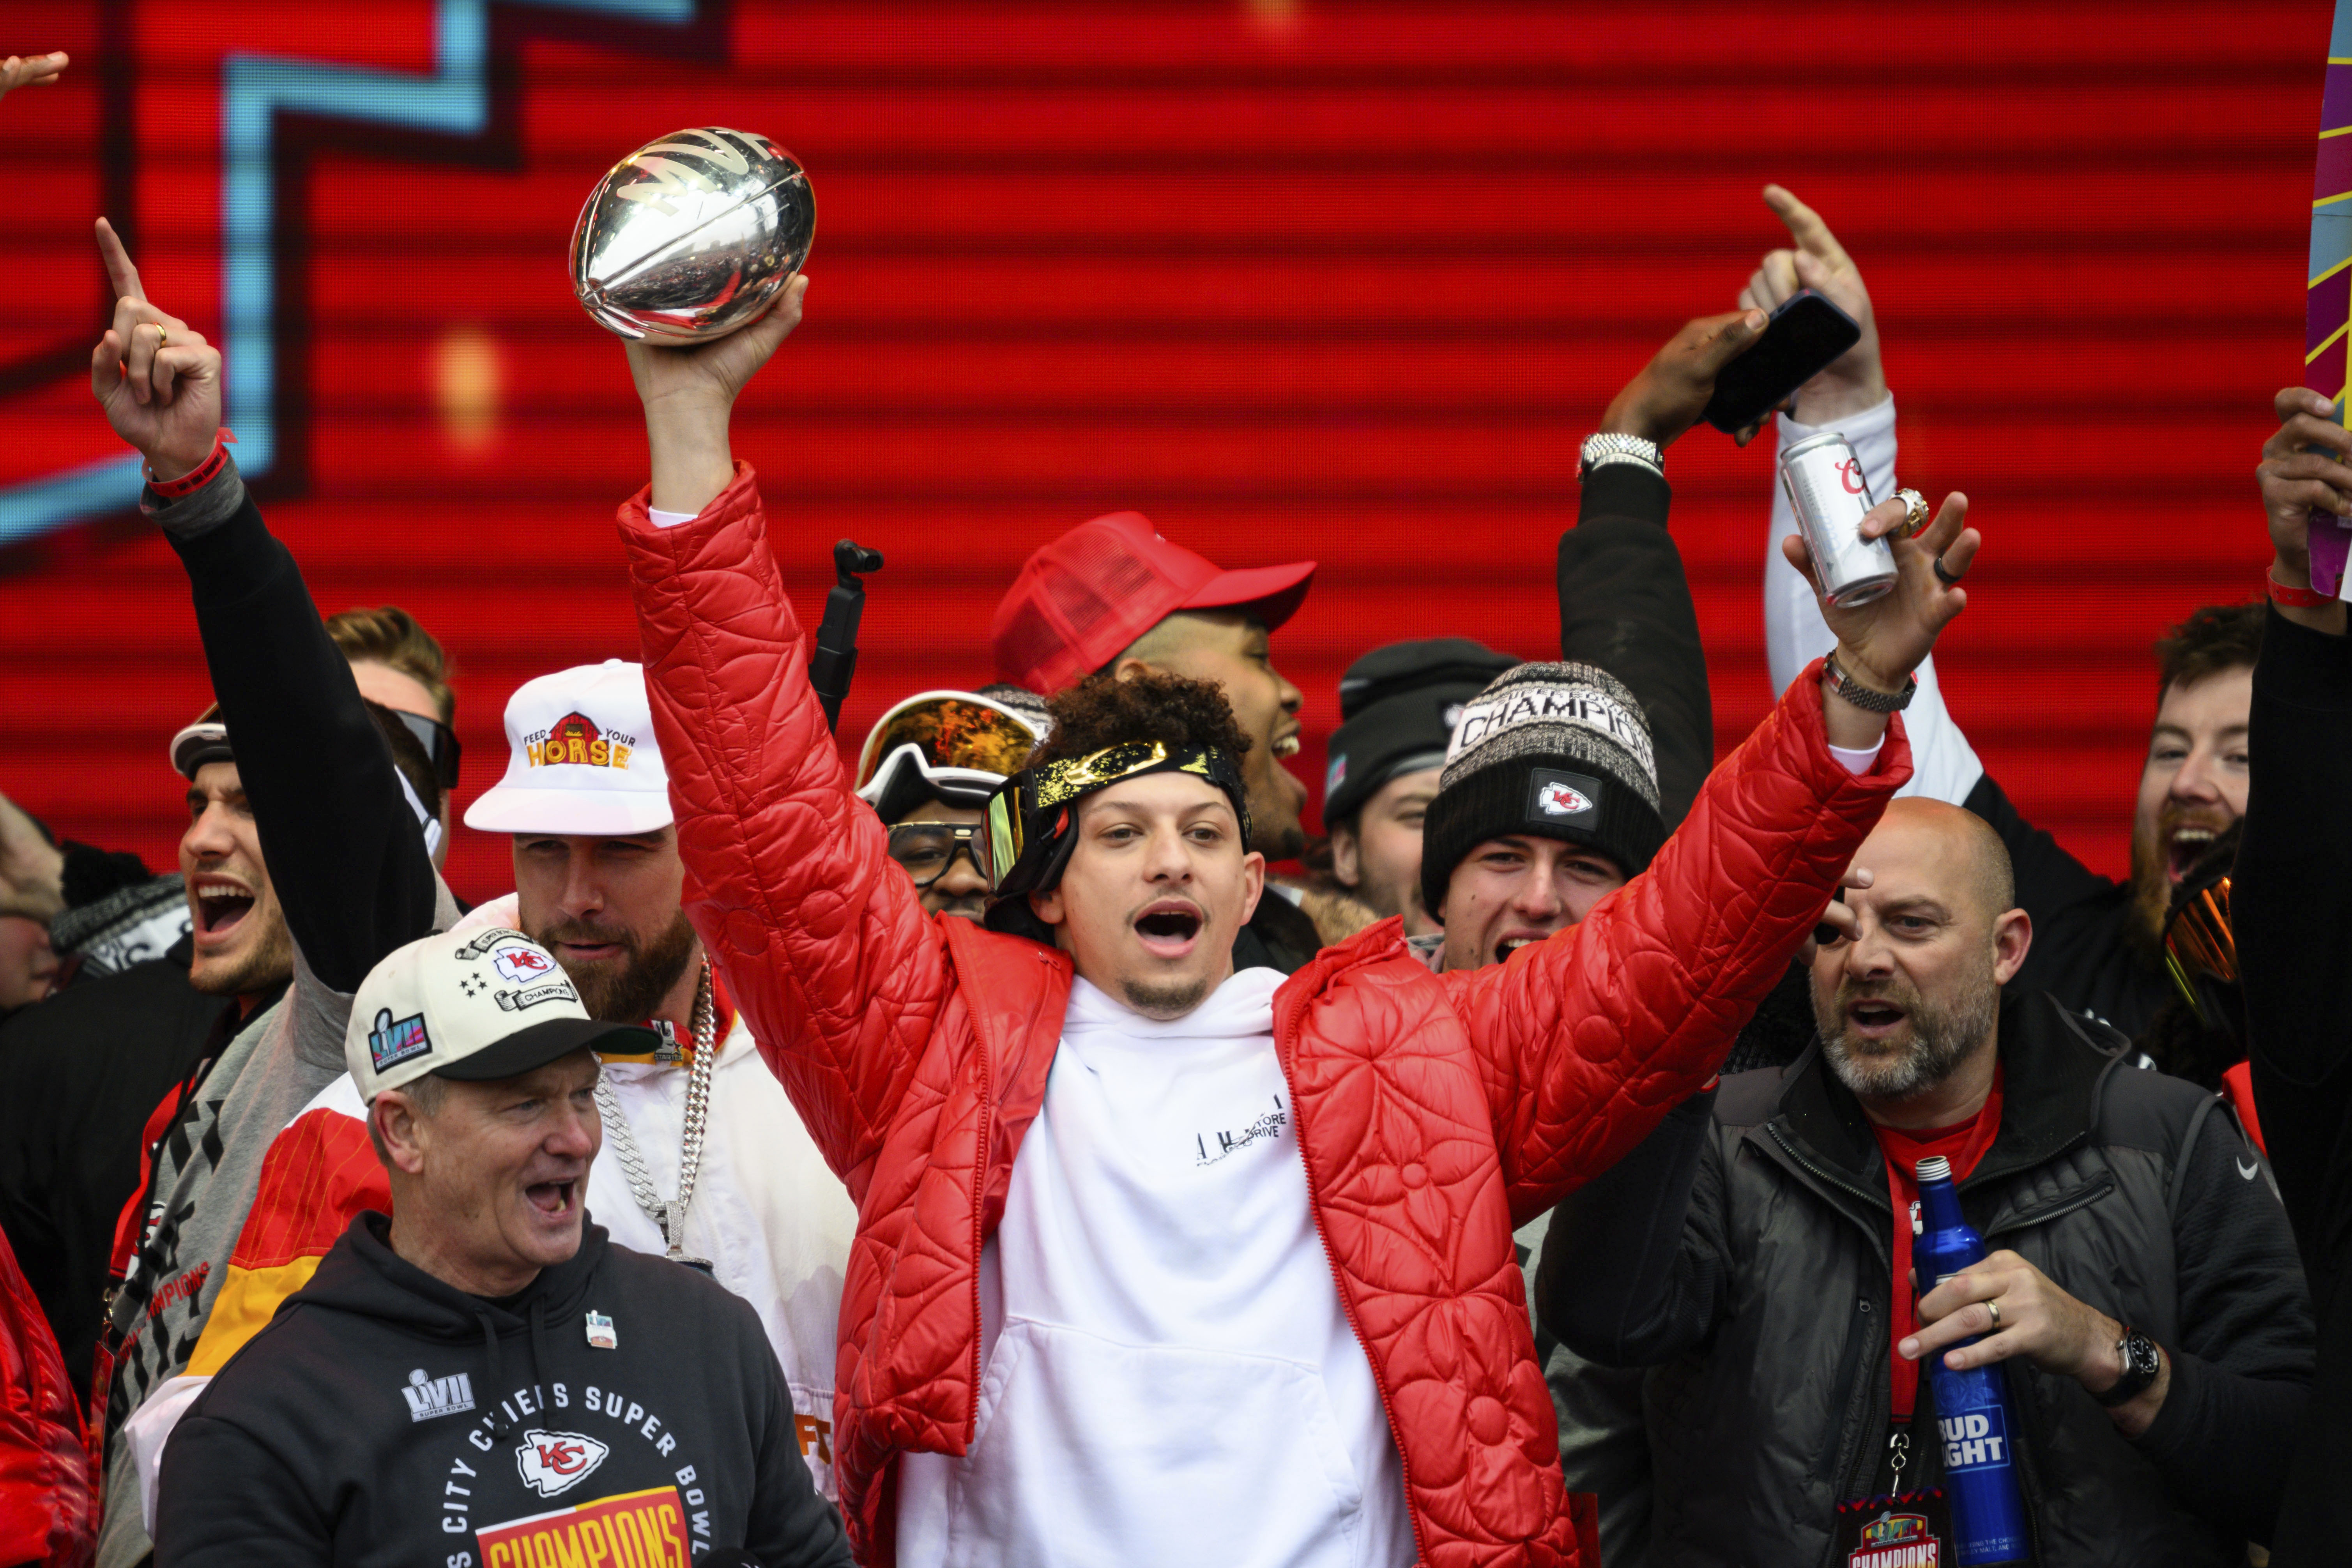 Chiefs fans climb trees to see Super Bowl parade